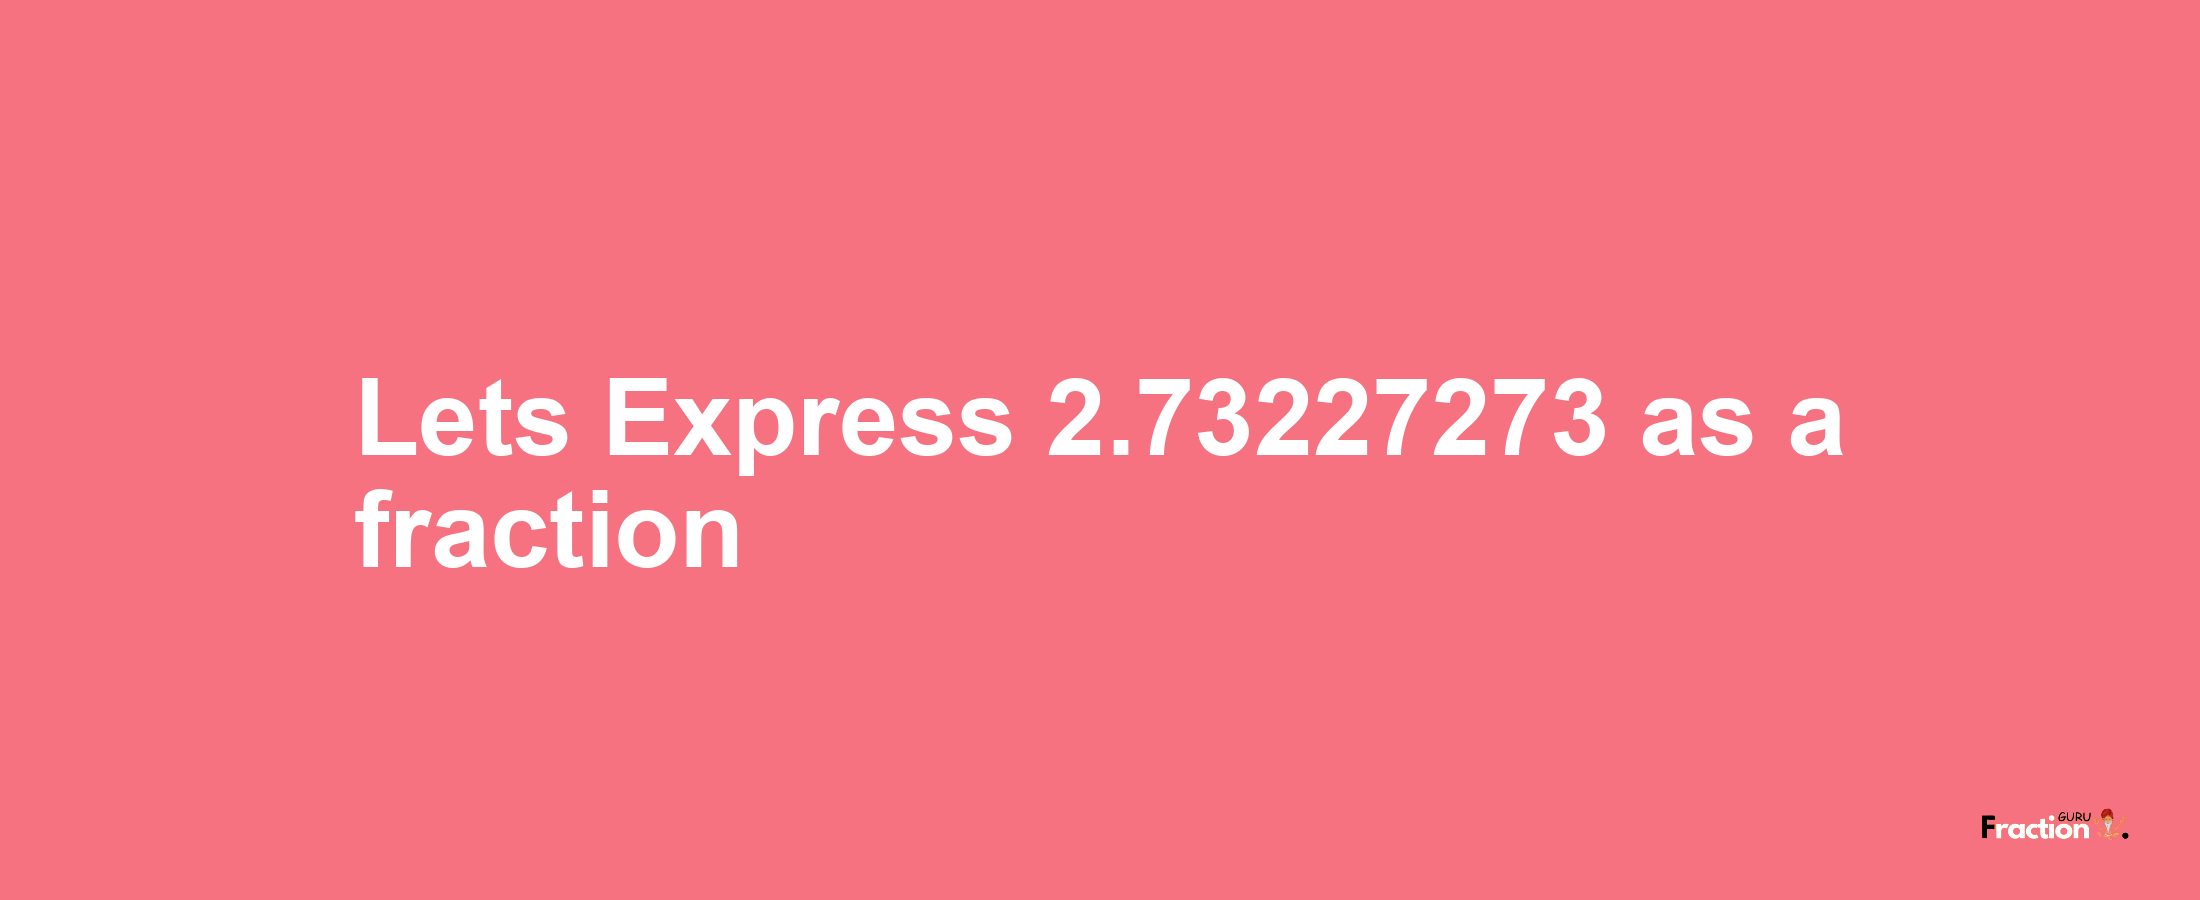 Lets Express 2.73227273 as afraction